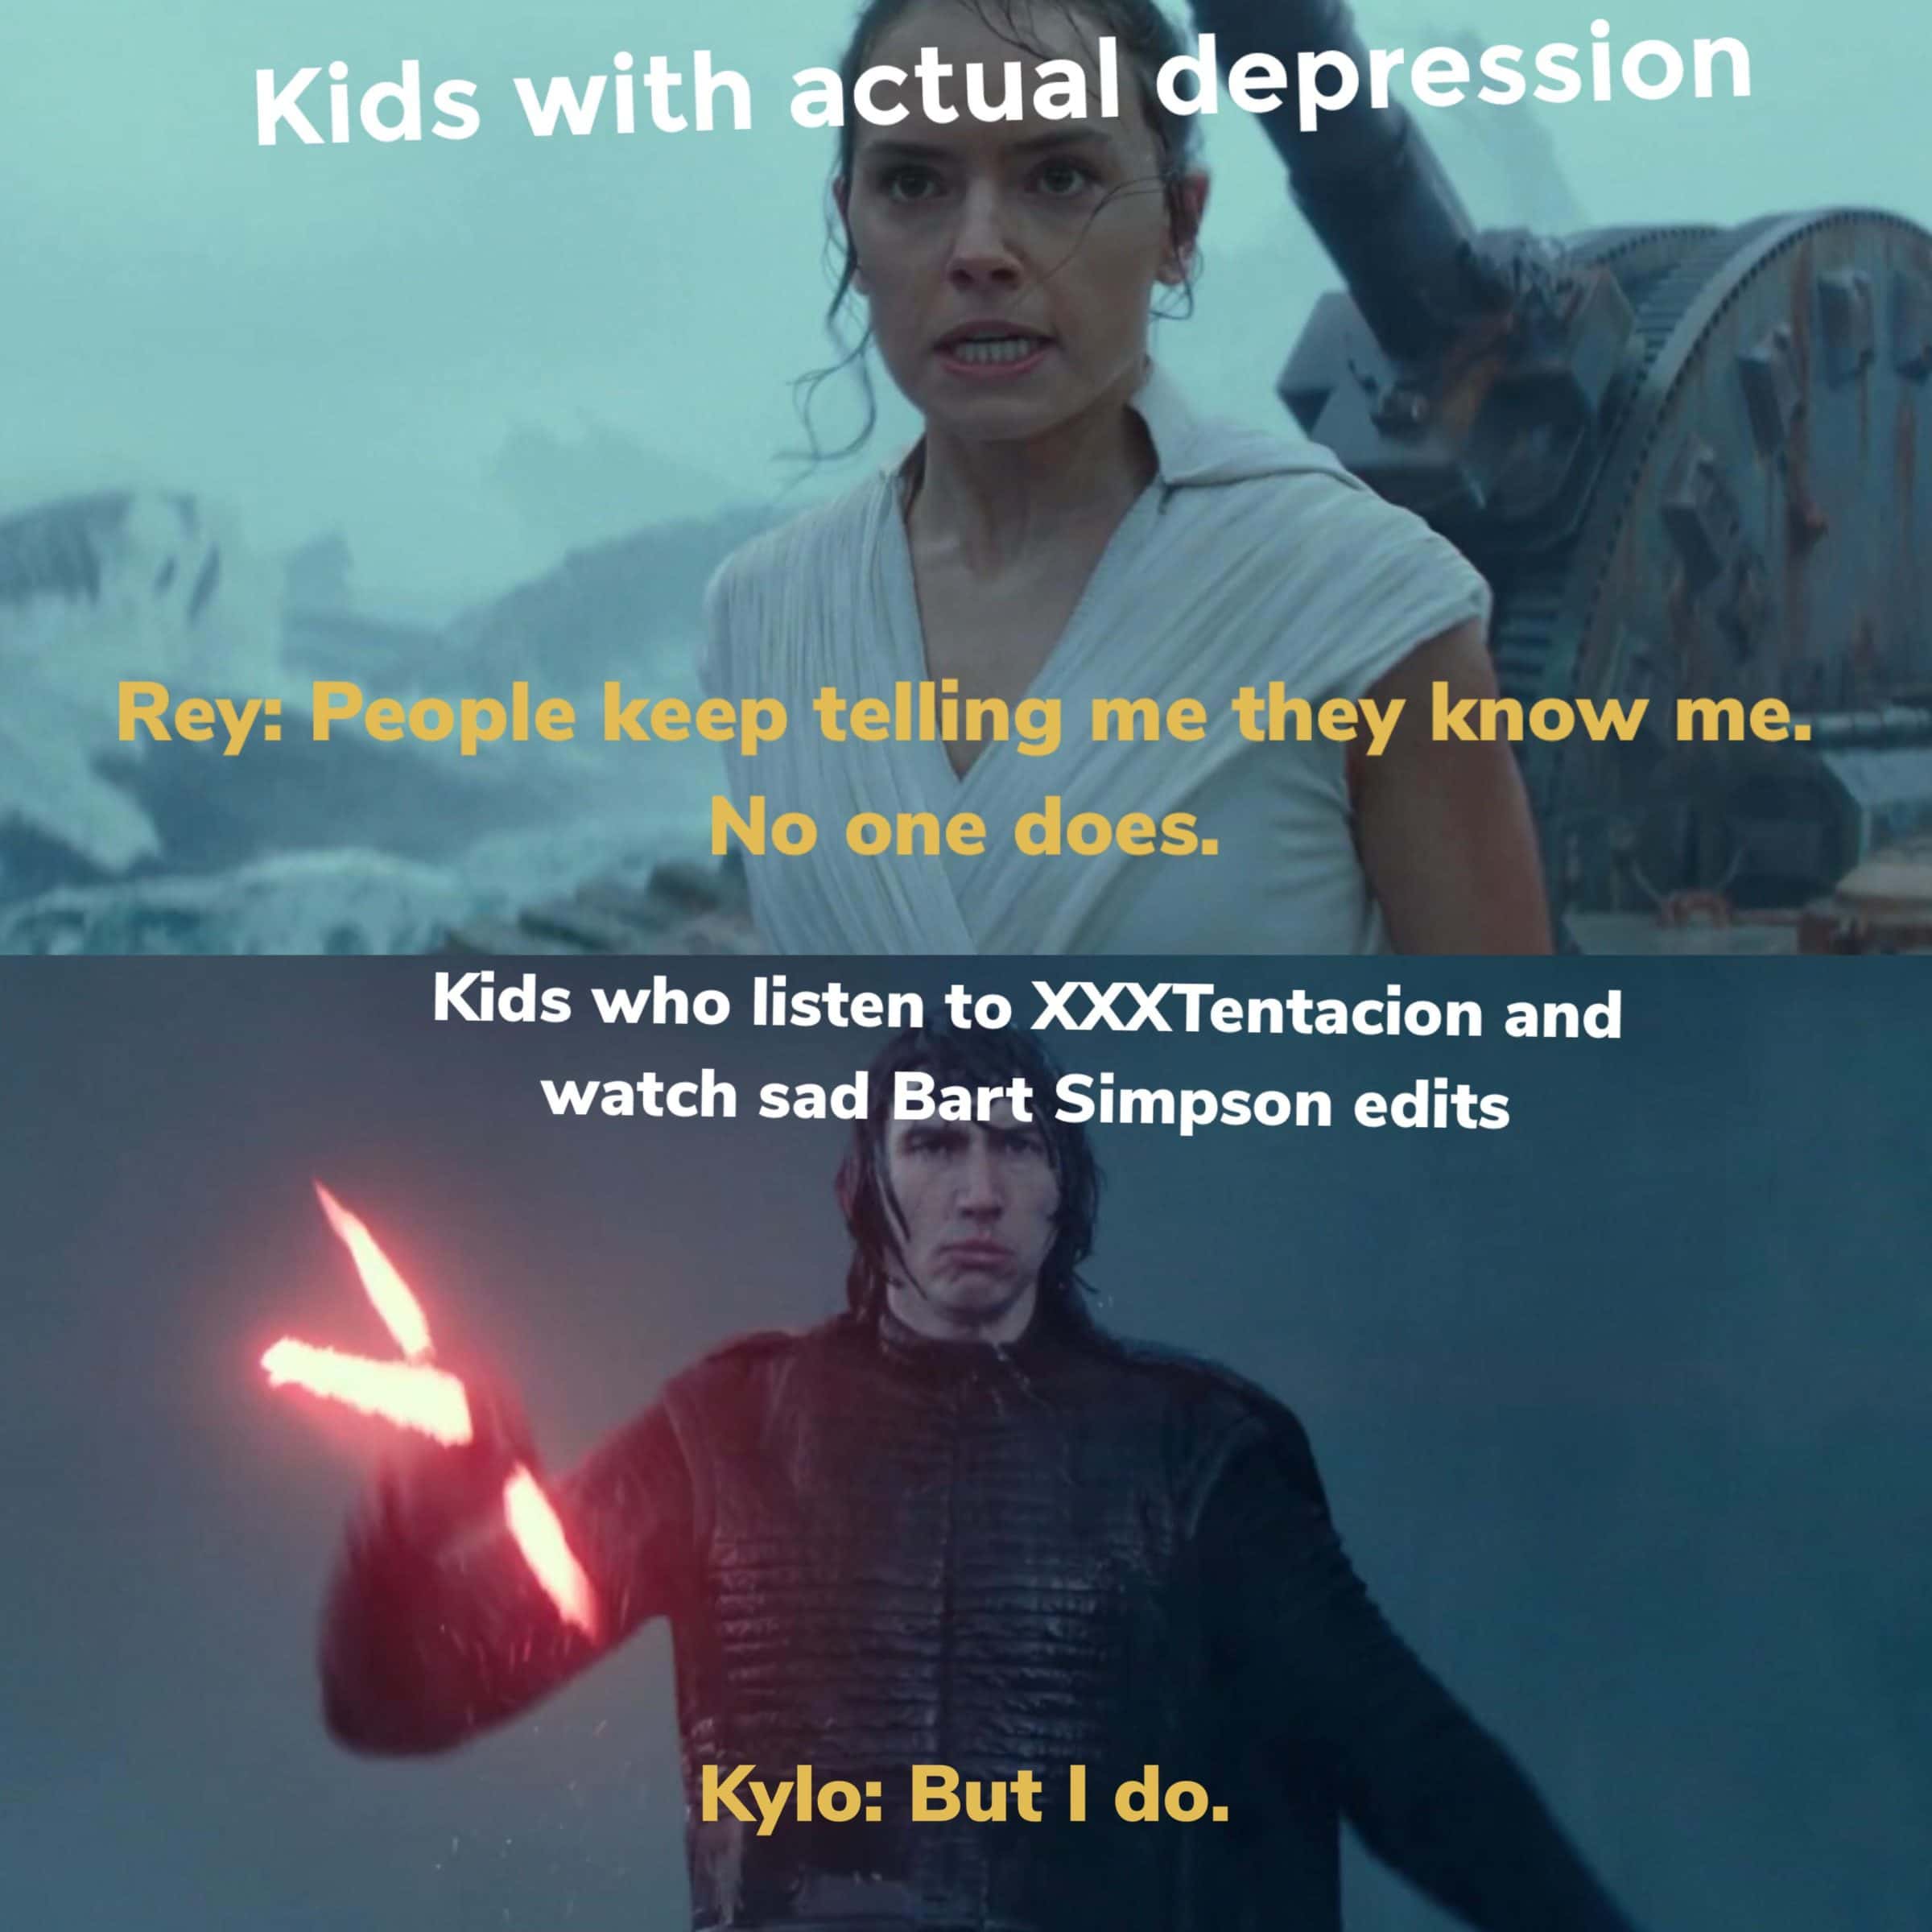 sequel-memes star-wars-memes sequel-memes text: Kids with éctual depression Rey: People keep telling me,they know me.- No one does. Kids who listen to and watch sad Bart Simpson edits Kylo: But I do. 